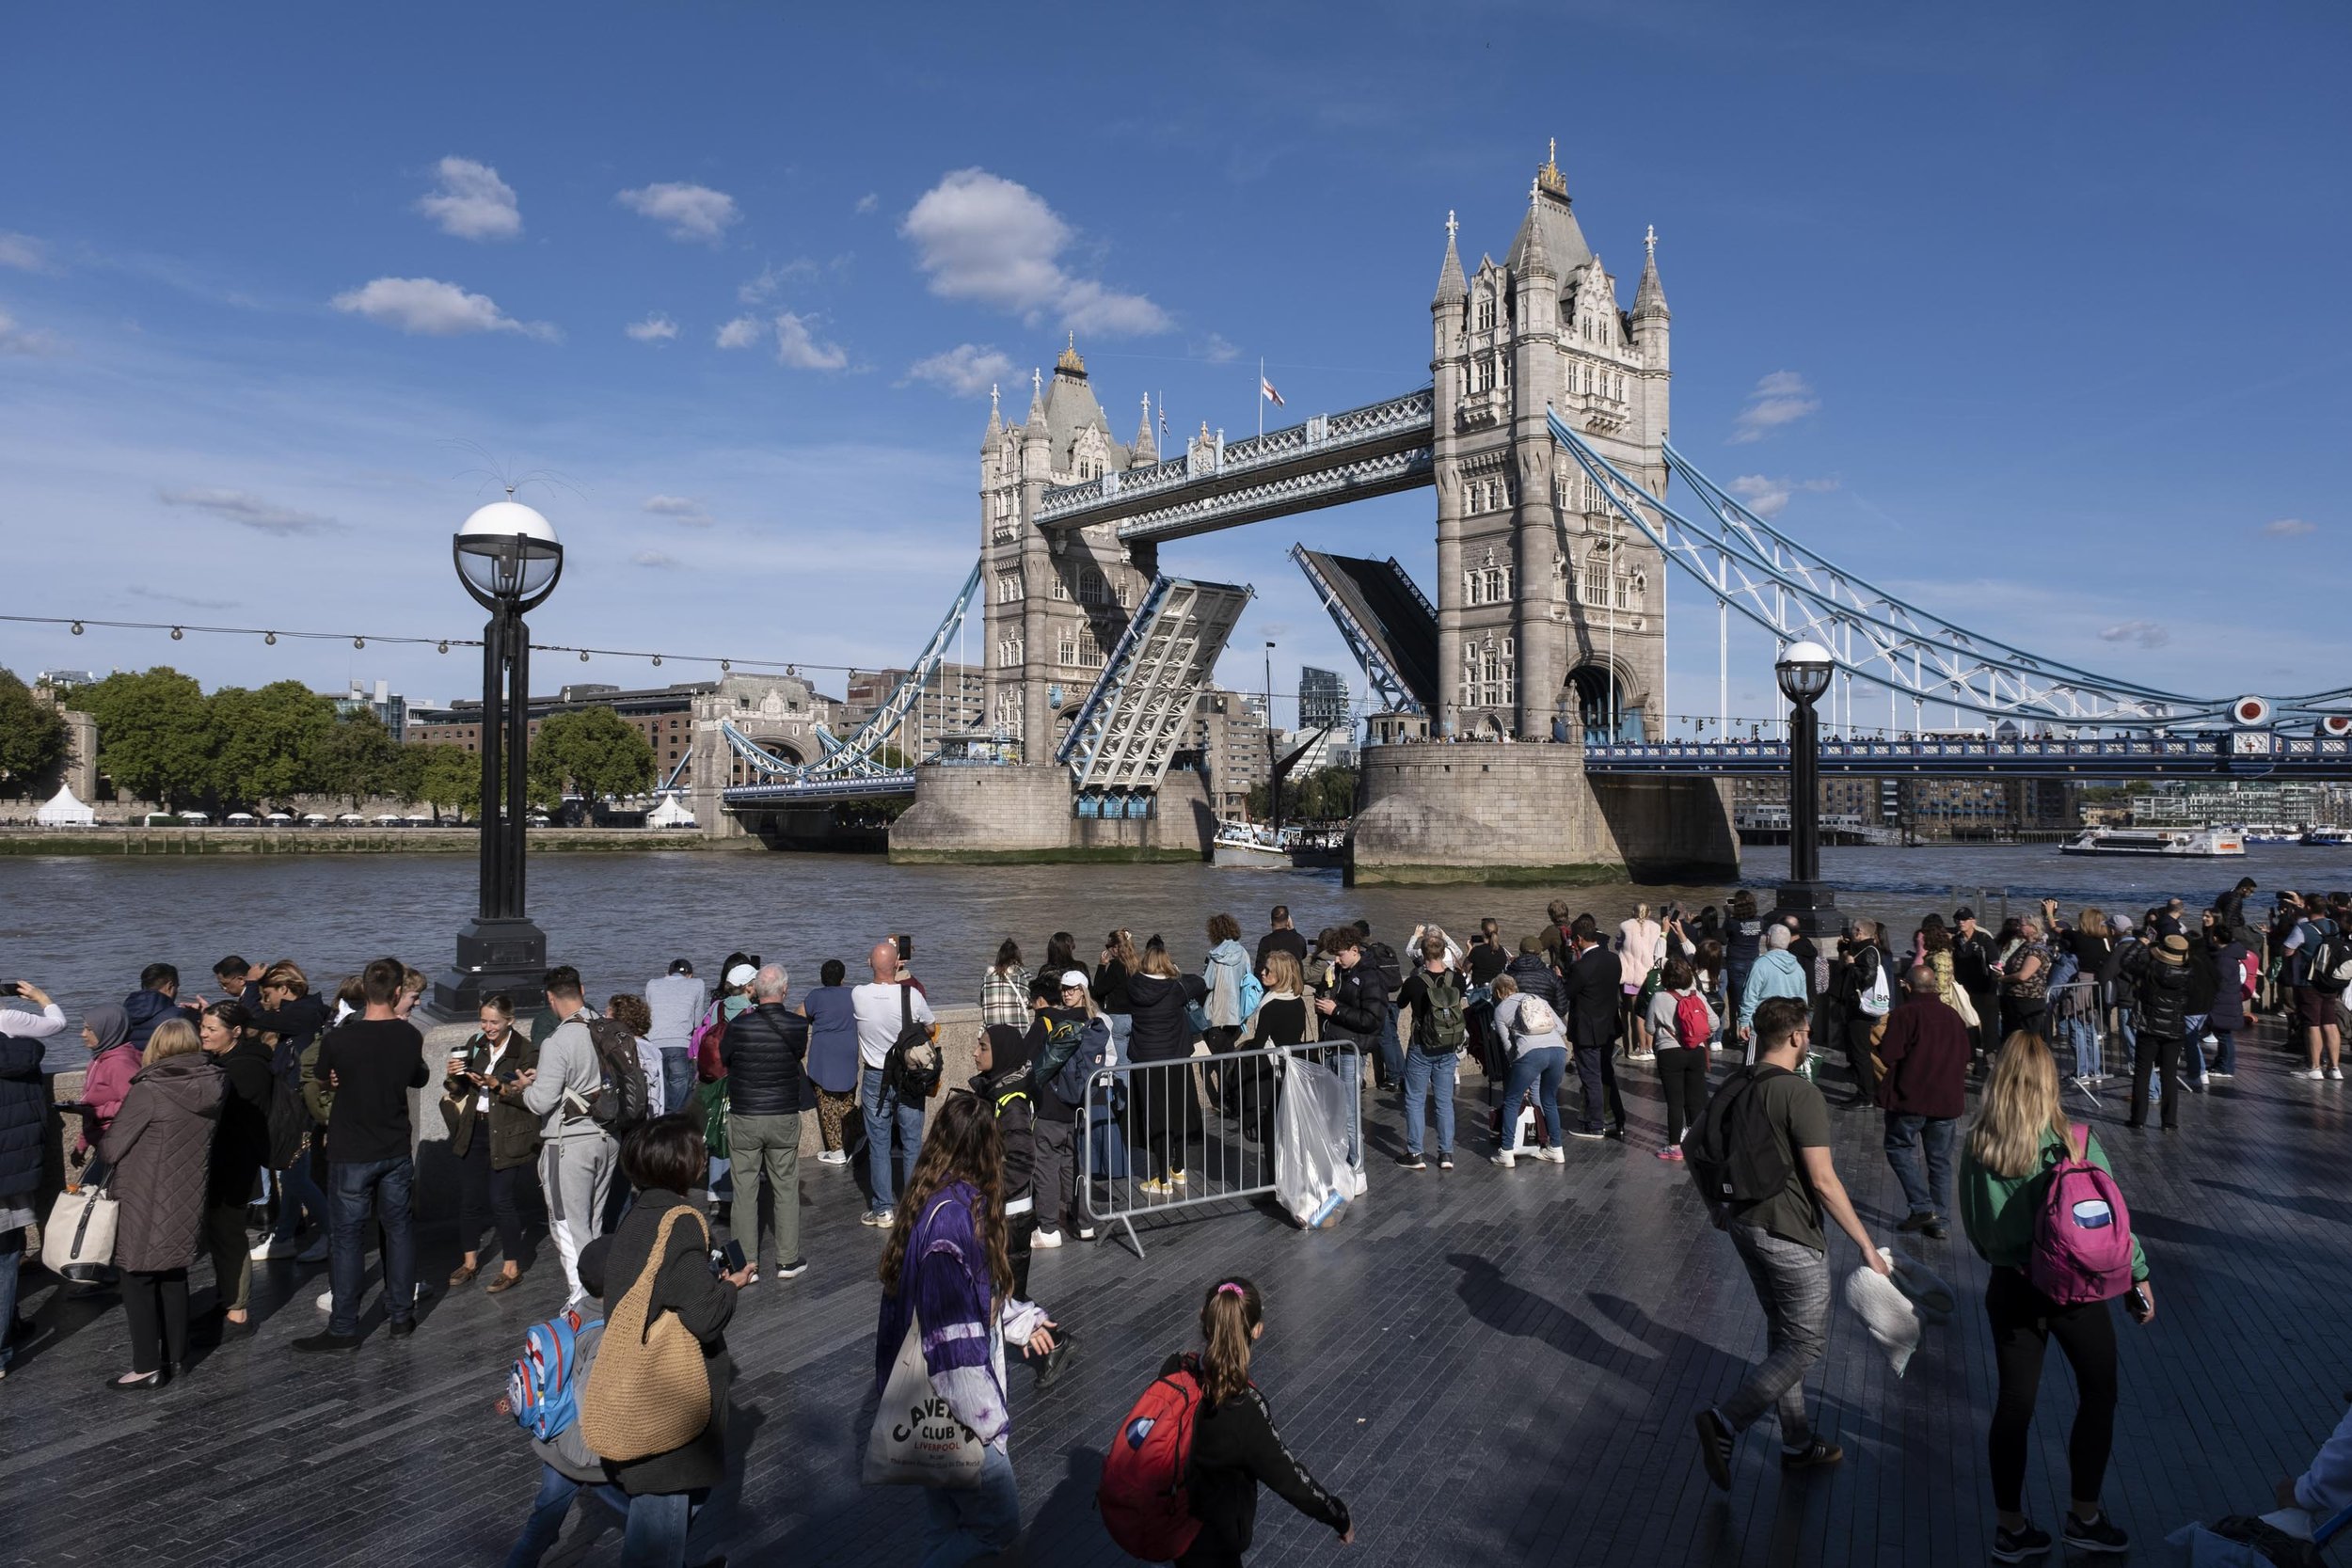  The queue to see Queen lying in state as Tower Bridge opens for a passing barge. 